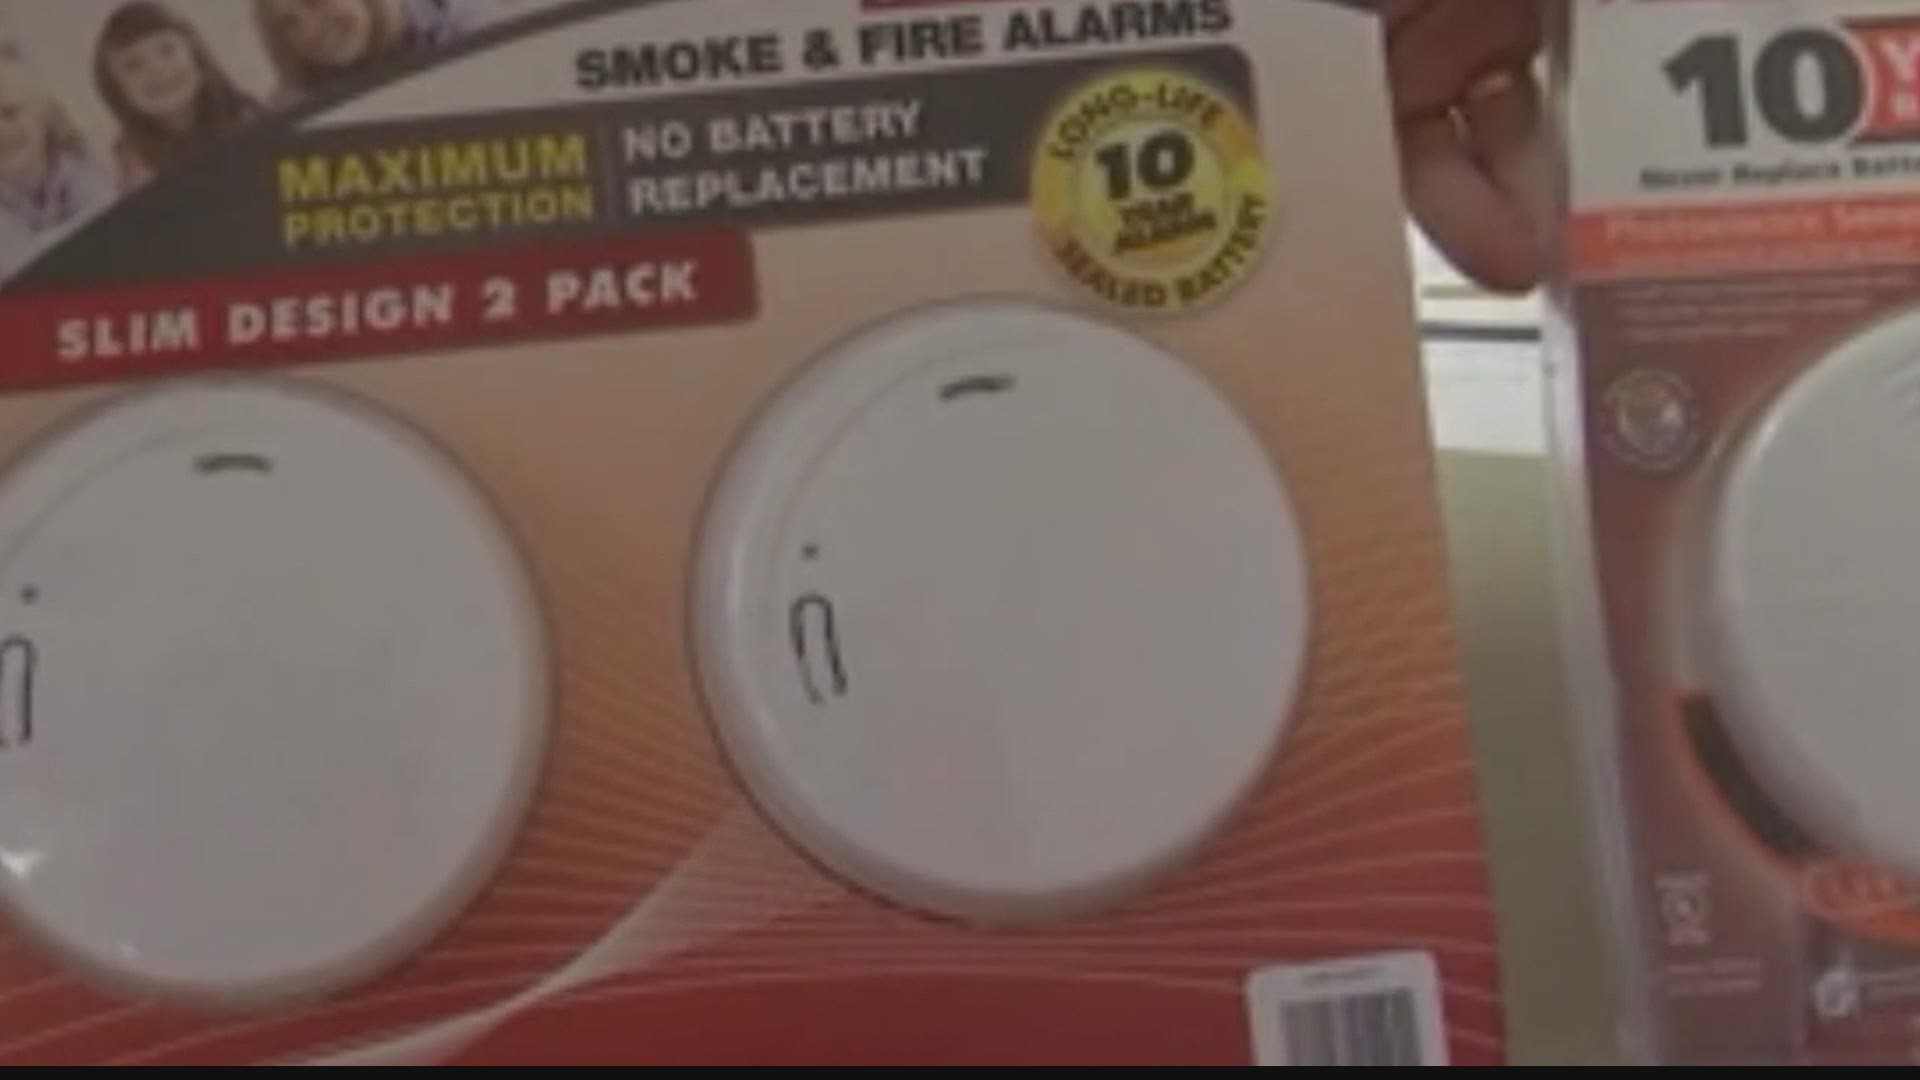 Firefighters recommend when it's time to replace a smoke detector to purchase one with a 10-year battery.